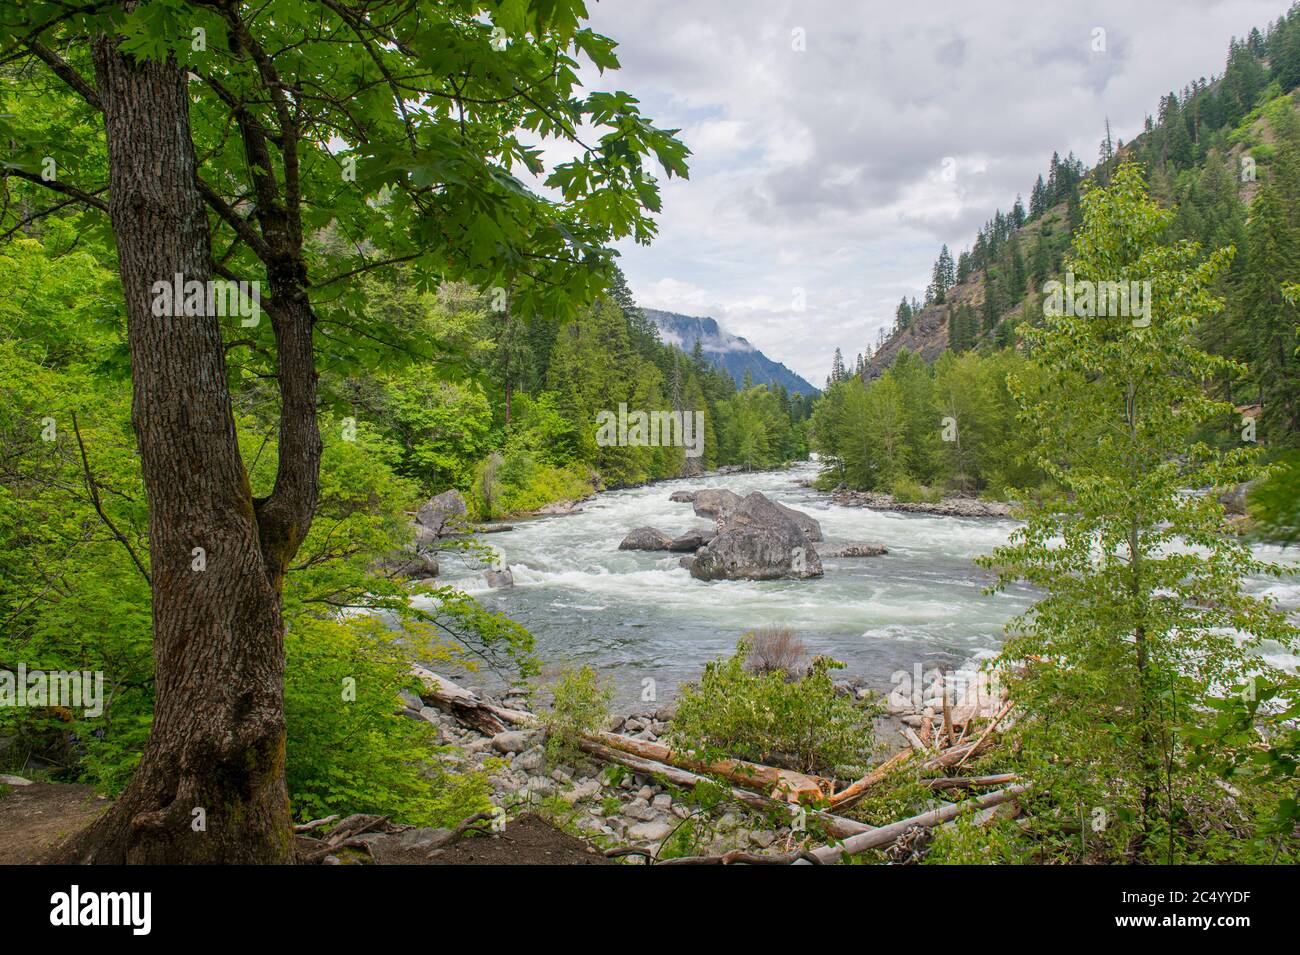 View of the Wenatchee River from the Old Pipeline Bed Trail near Leavenworth in eastern Washington State, USA. Stock Photo